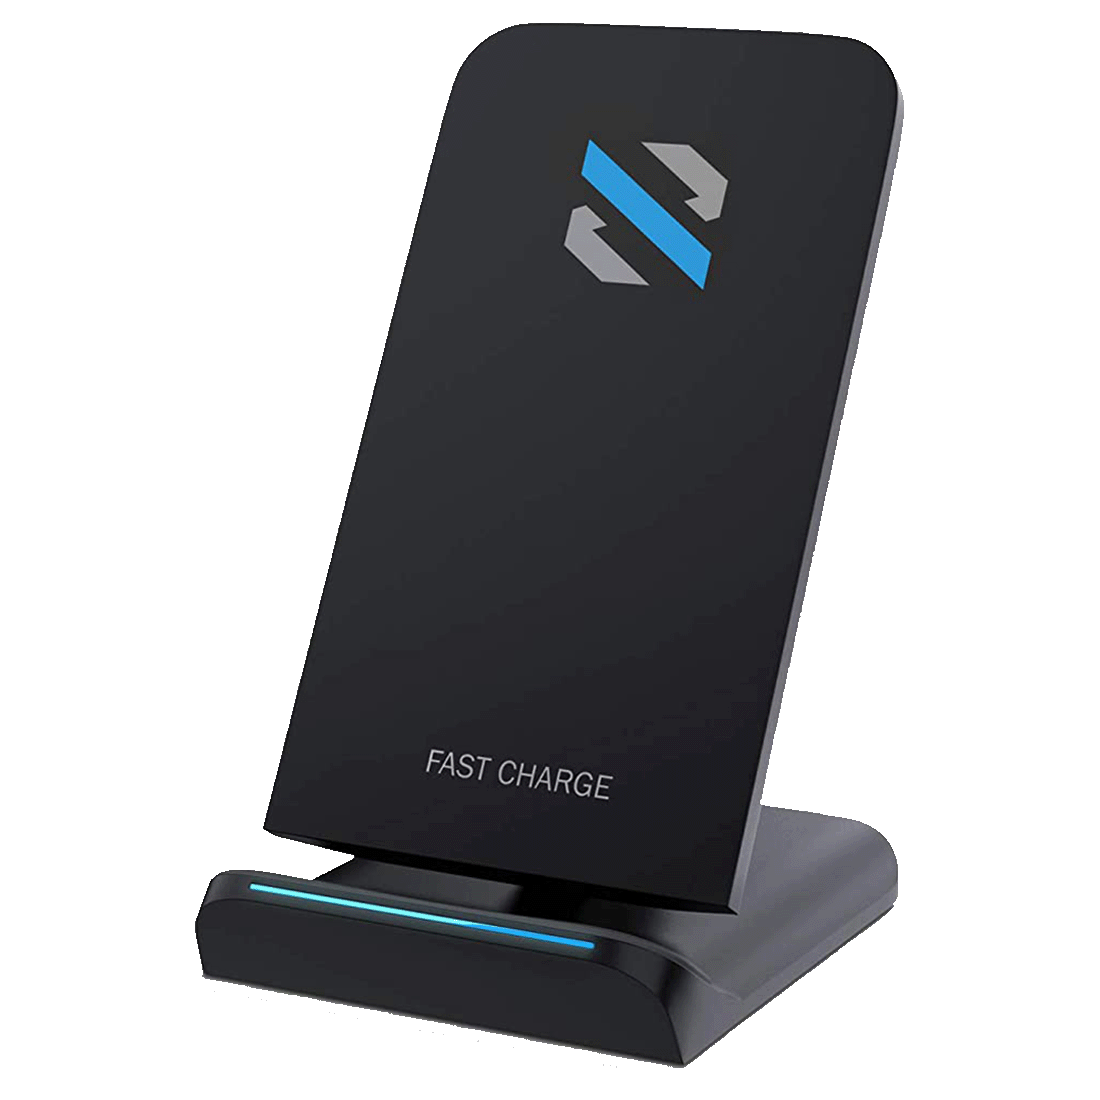 Buy SKYVIK Beam 2 15W Wireless Charger for iPhone and Android (Qi ...